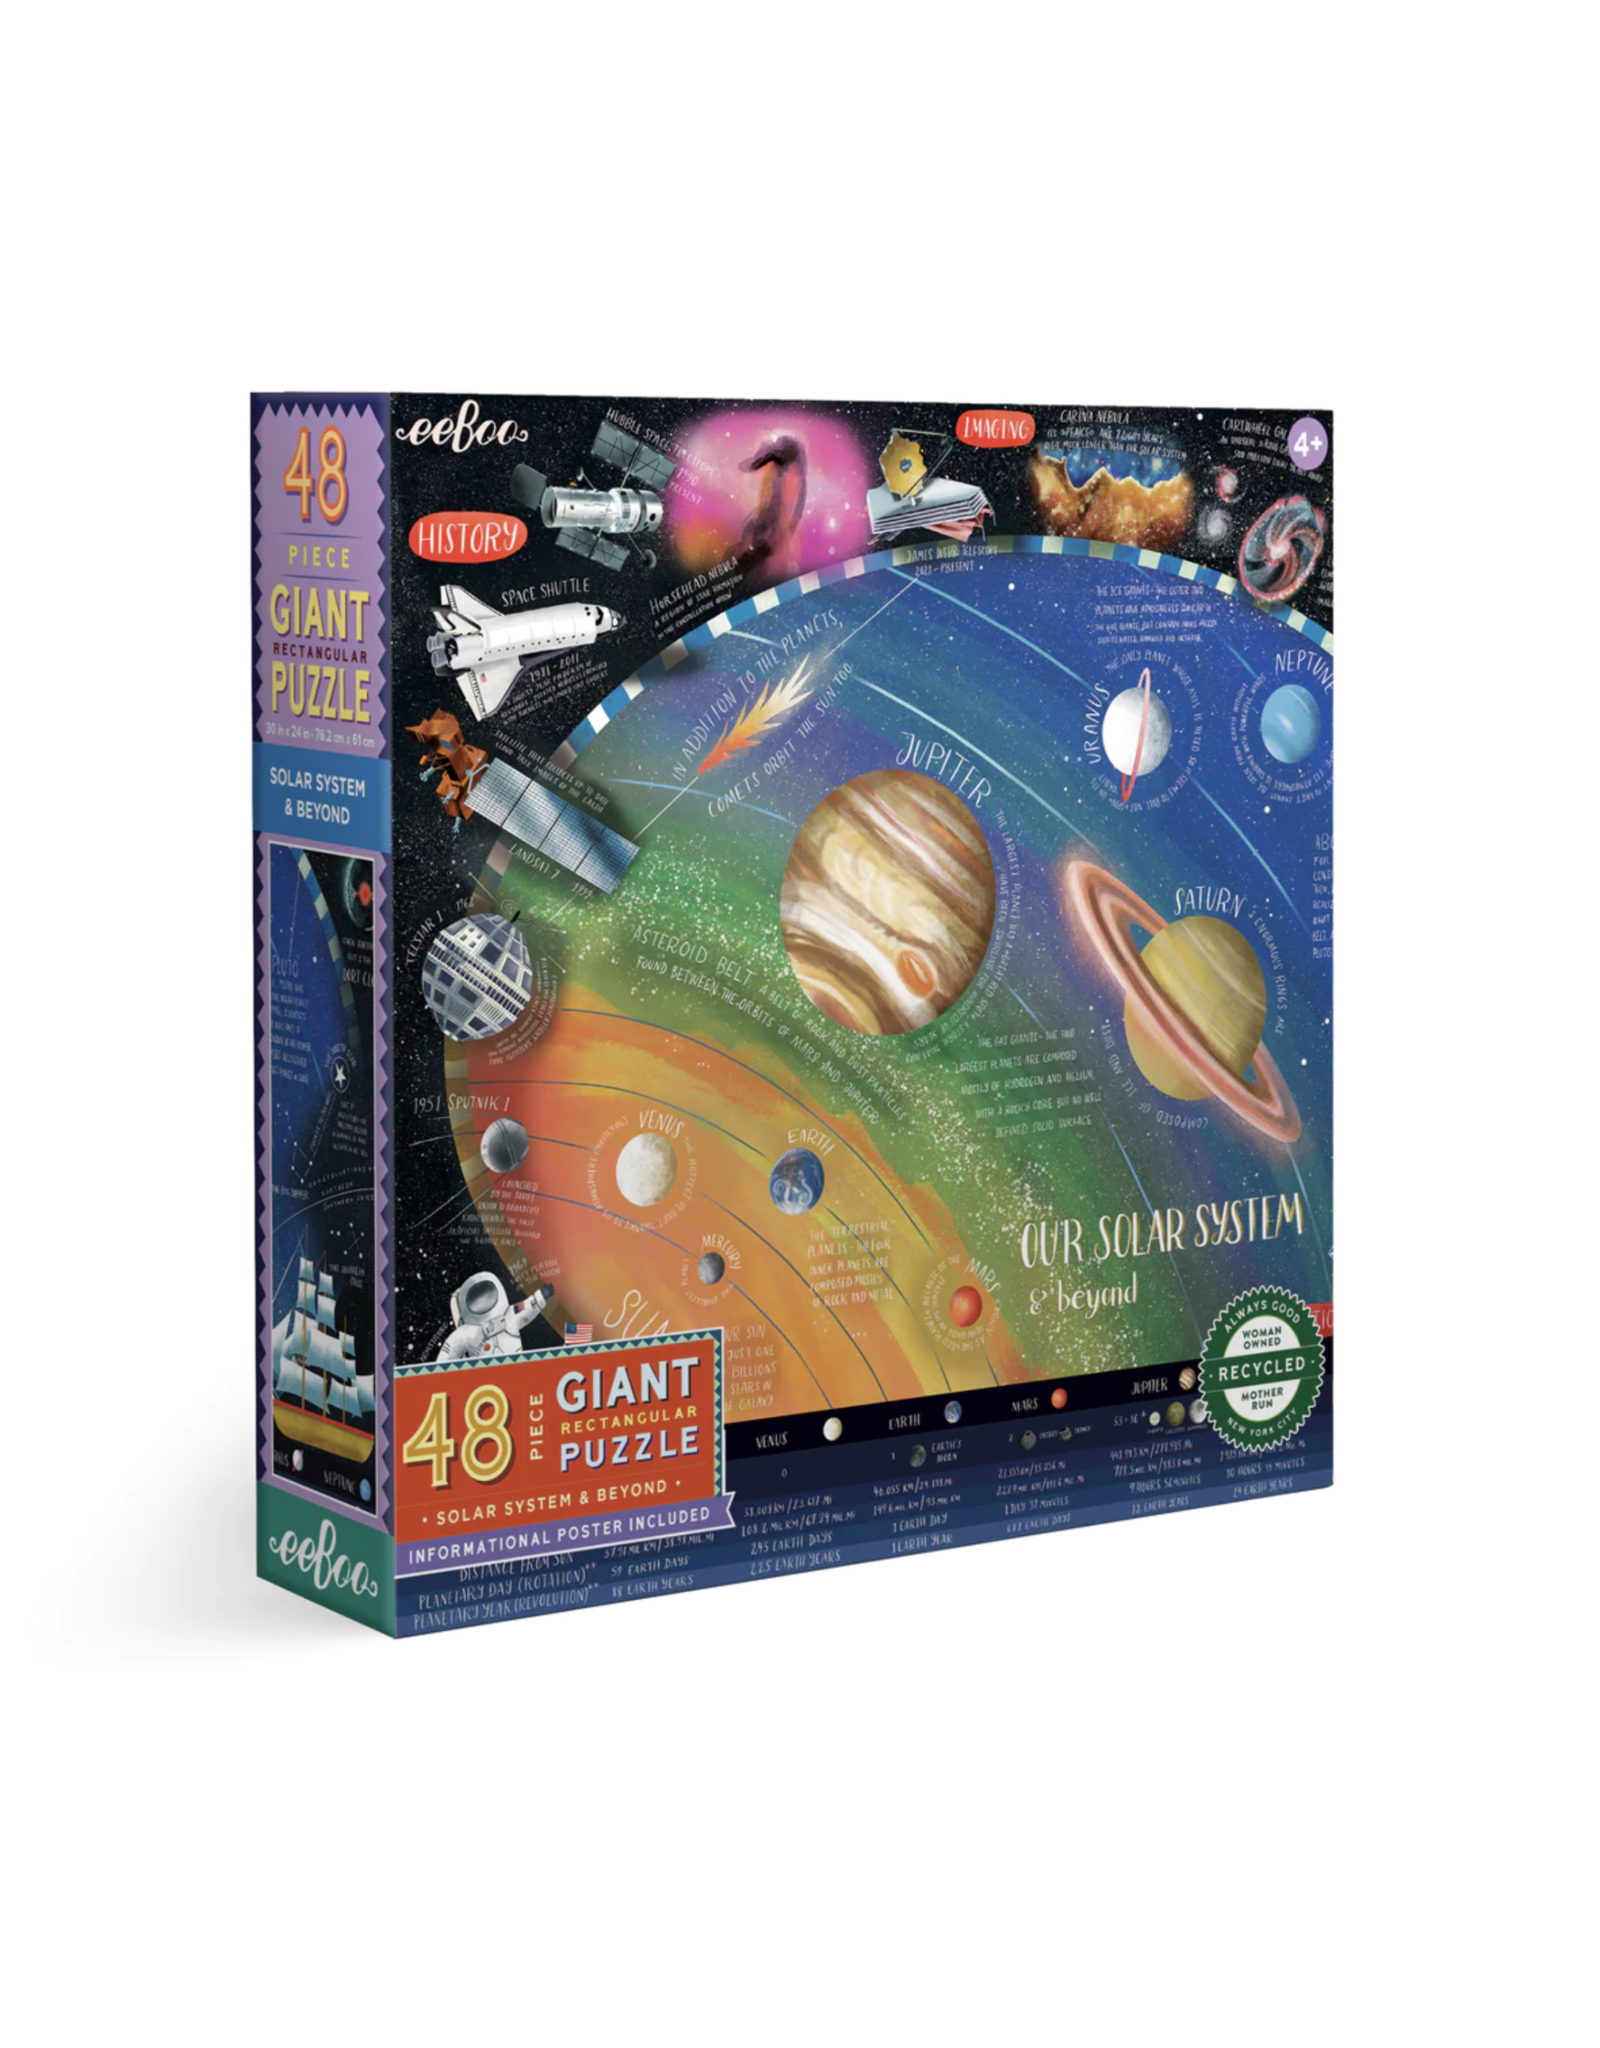 eeBoo Solar System & Beyond 48pc Giant Puzzle